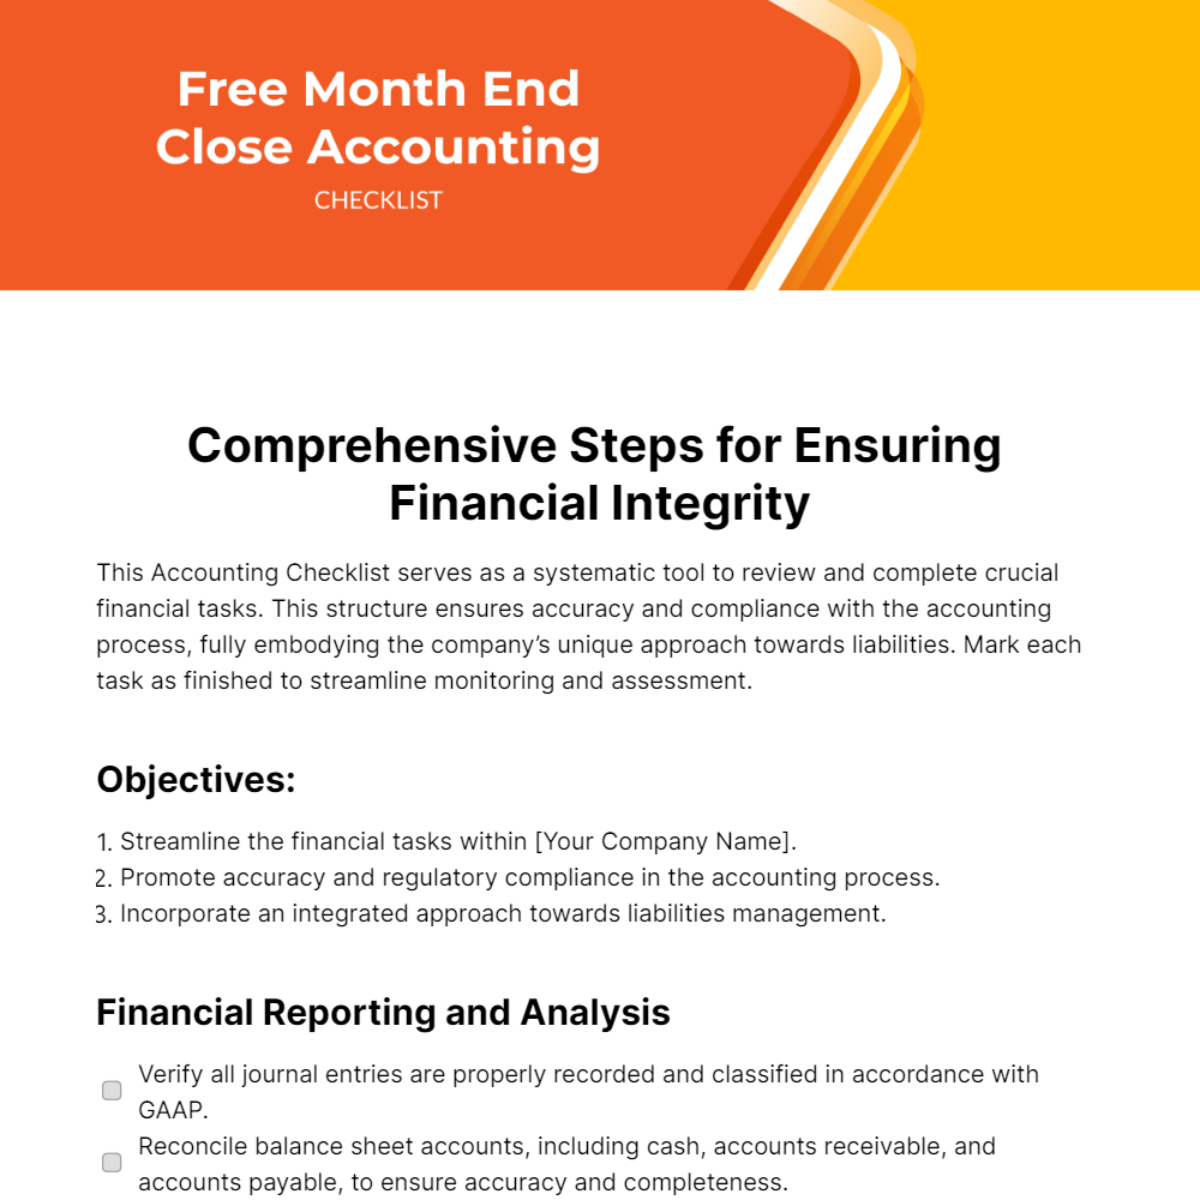 Free Month End Close Accounting Checklist Template